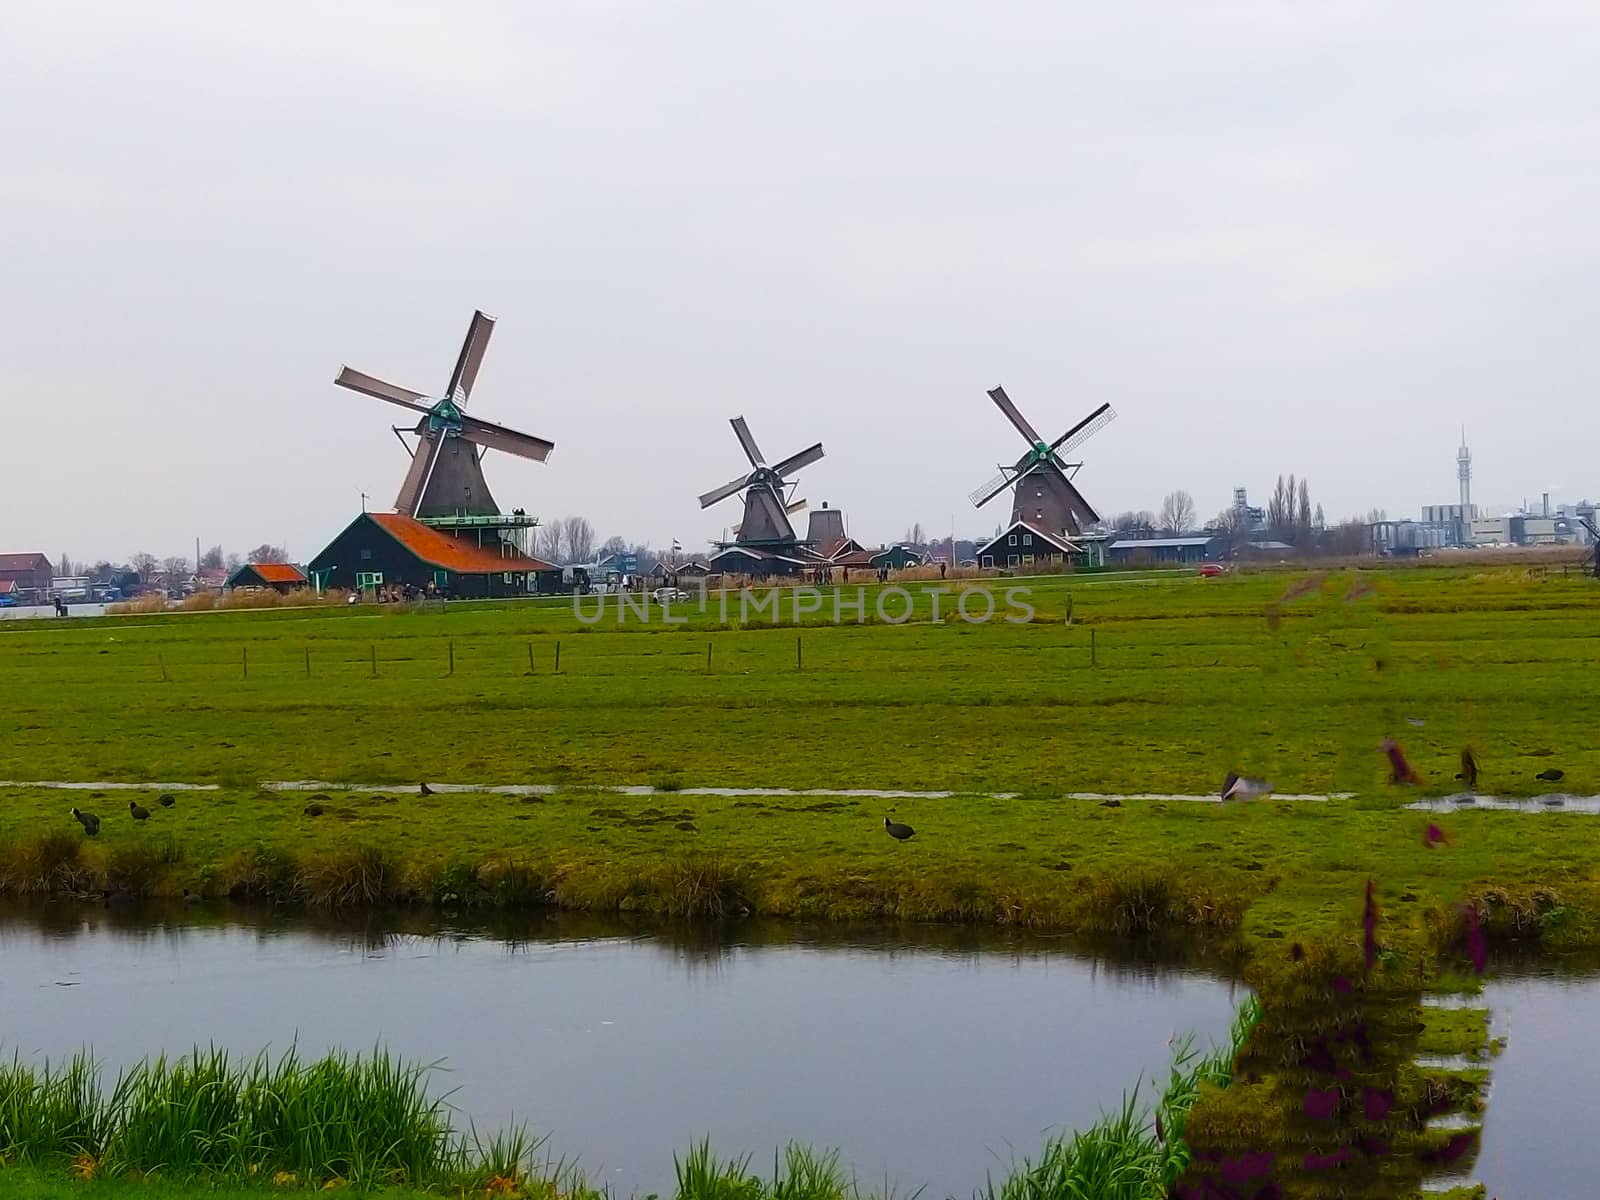 visiting a rural area in Netherlands by gswagh71